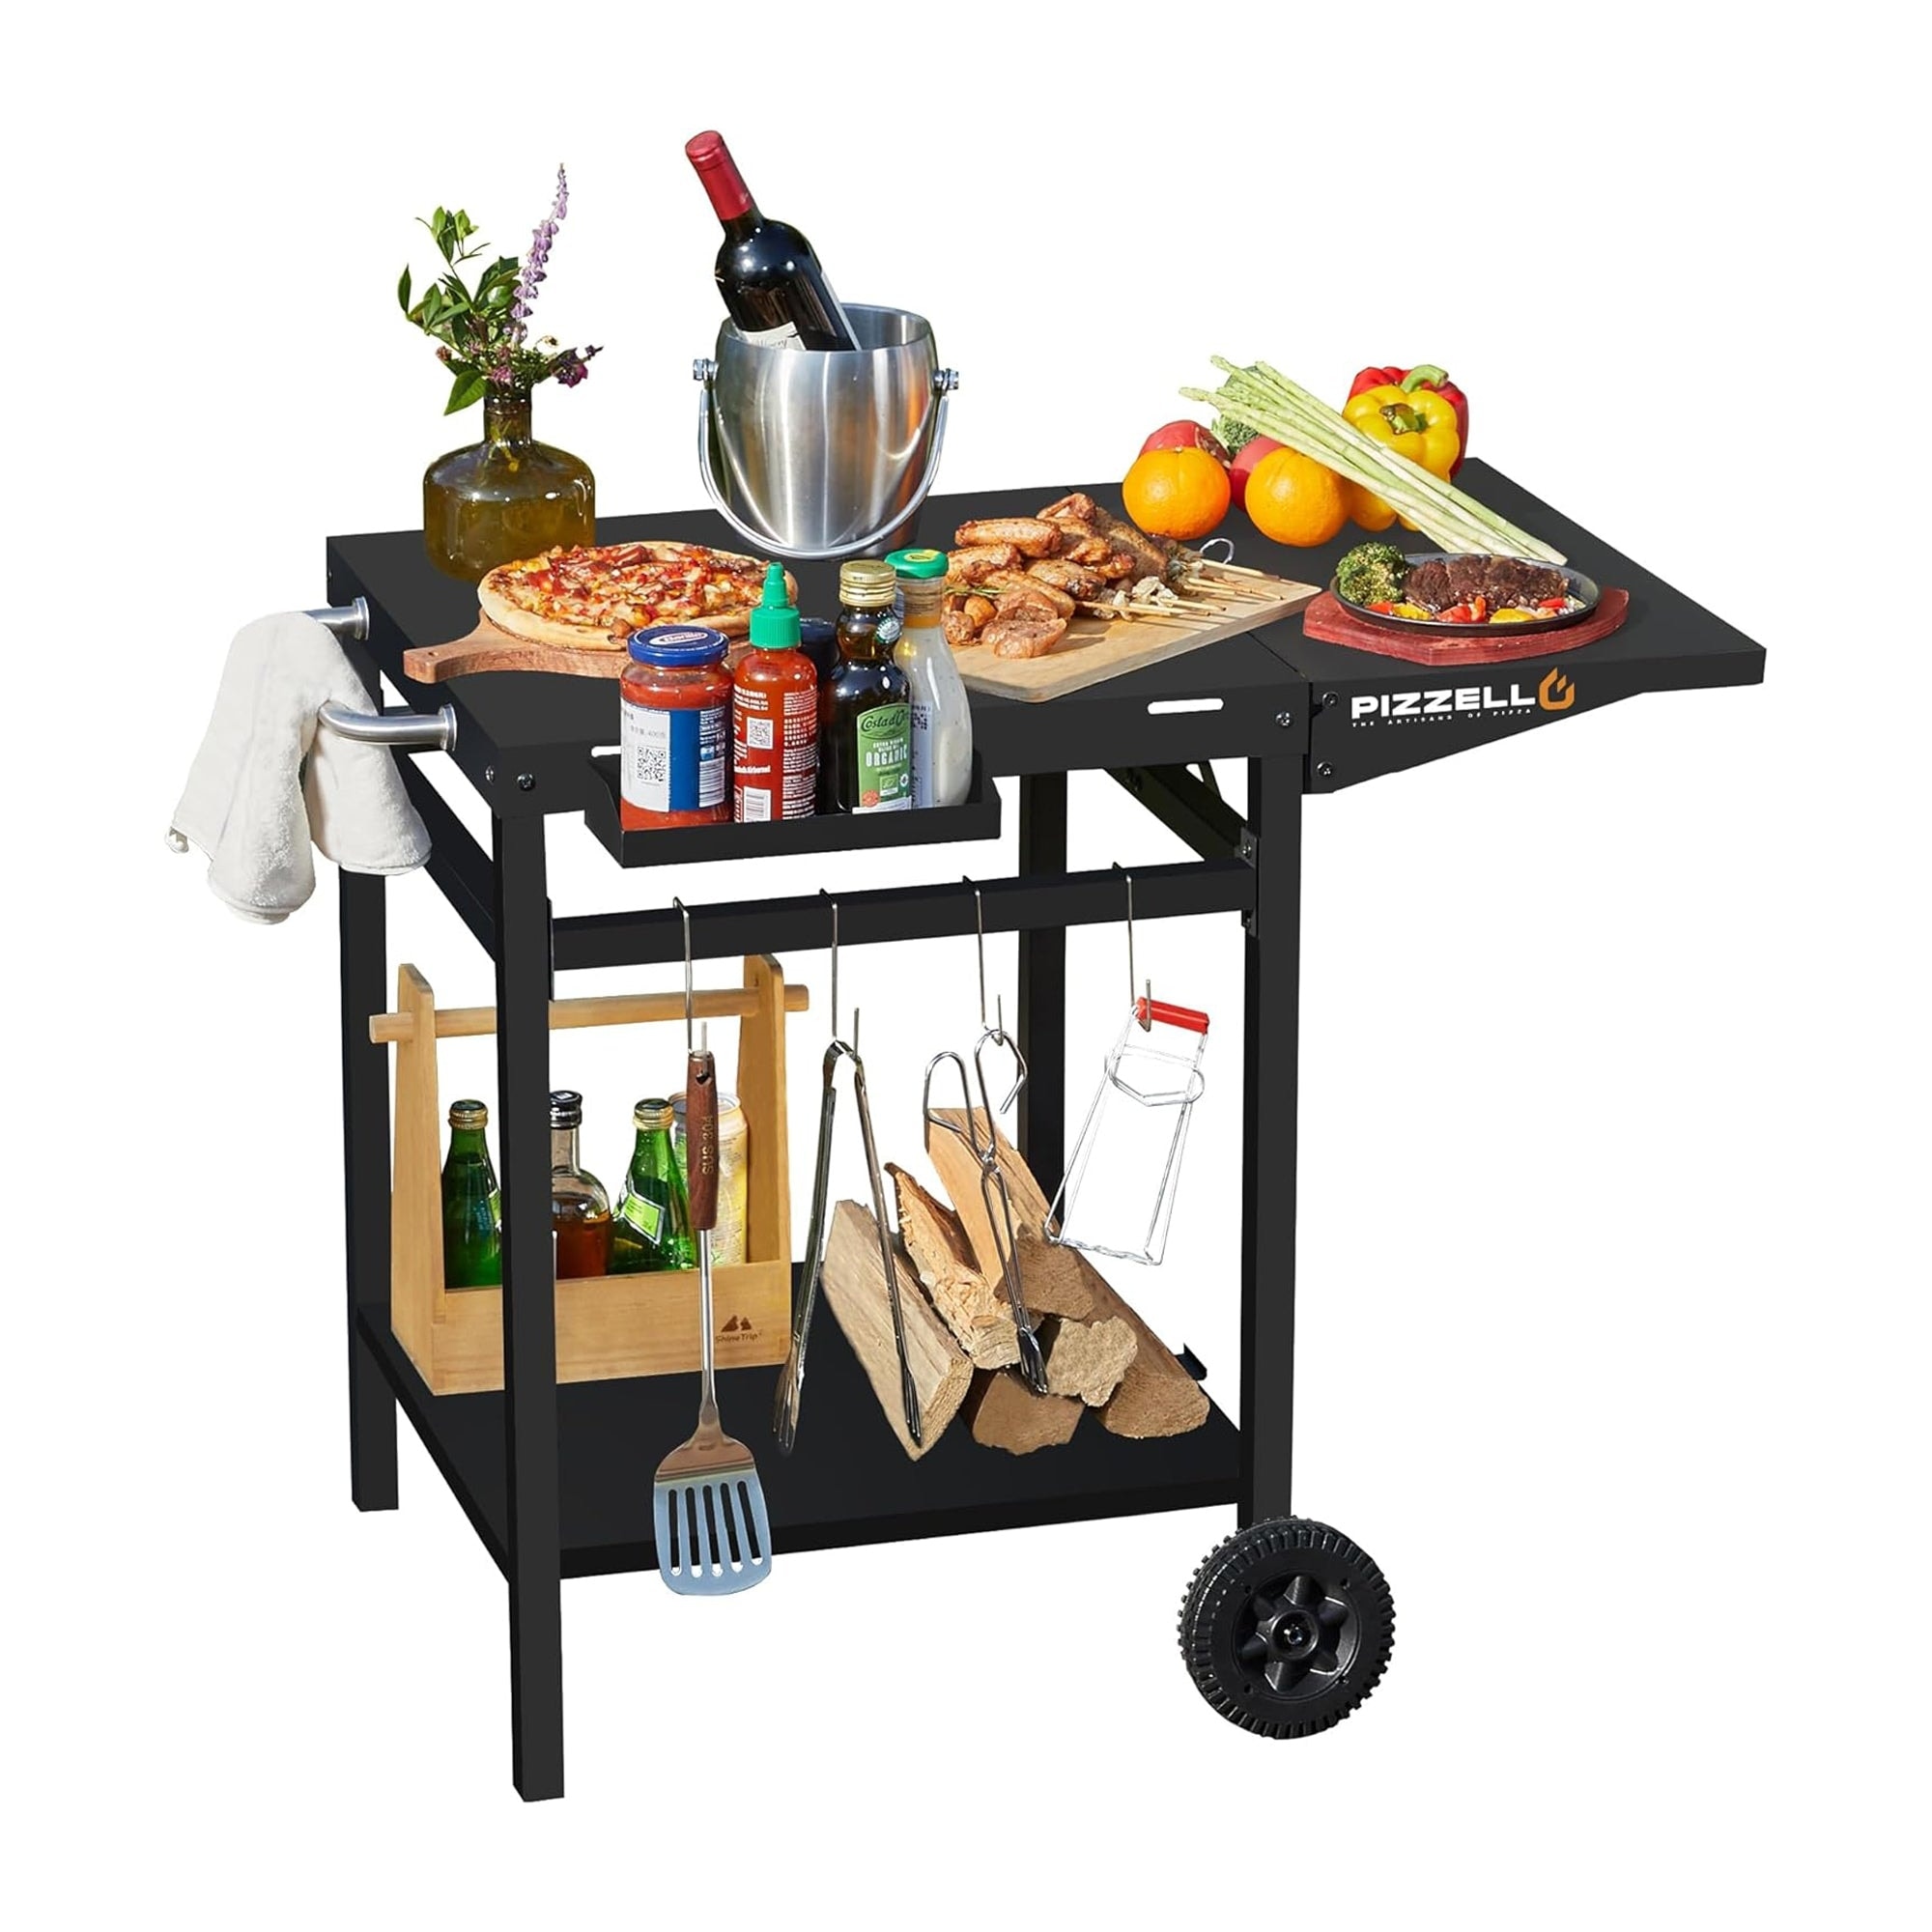 https://ak1.ostkcdn.com/images/products/is/images/direct/18239c5ae11cd3e7cf0258da15f2cfafc0e671df/Pizzello-Outdoor-Grill-Dining-Cart-Pizza-Oven-Trolley-BBQ-Stand.jpg